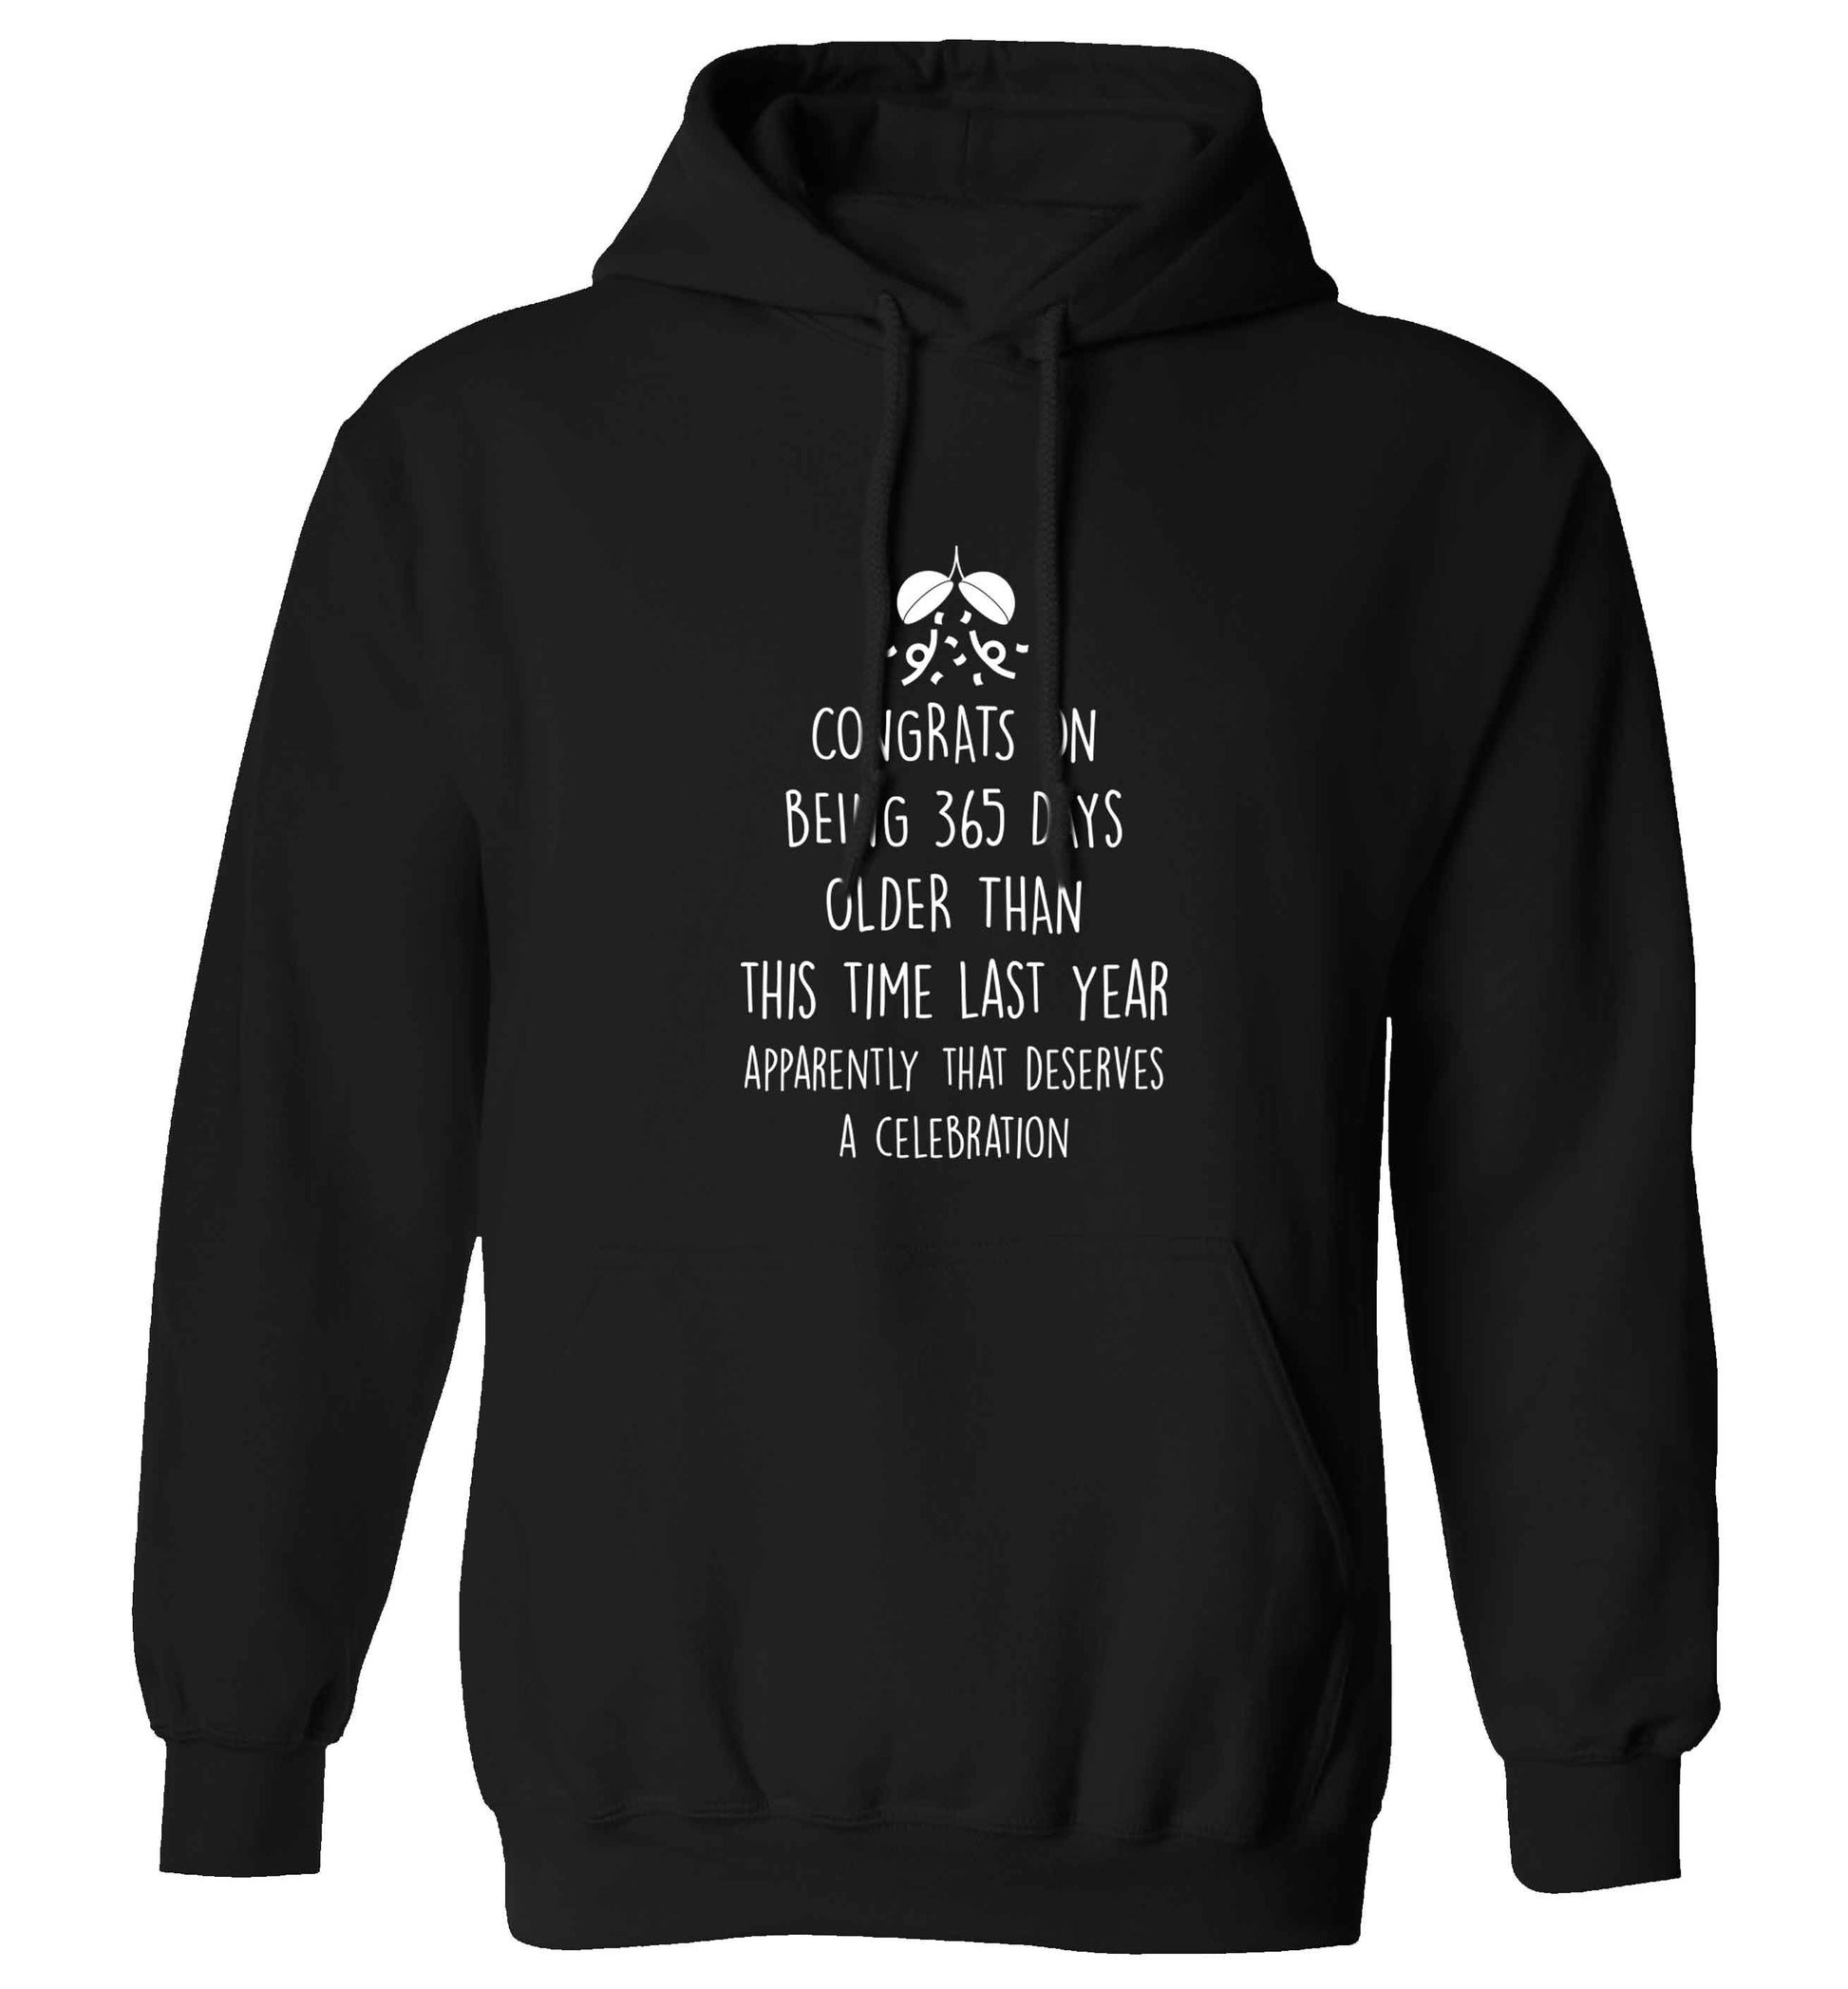 Congrats on being 365 days older than you were this time last year apparently that deserves a celebration adults unisex black hoodie 2XL